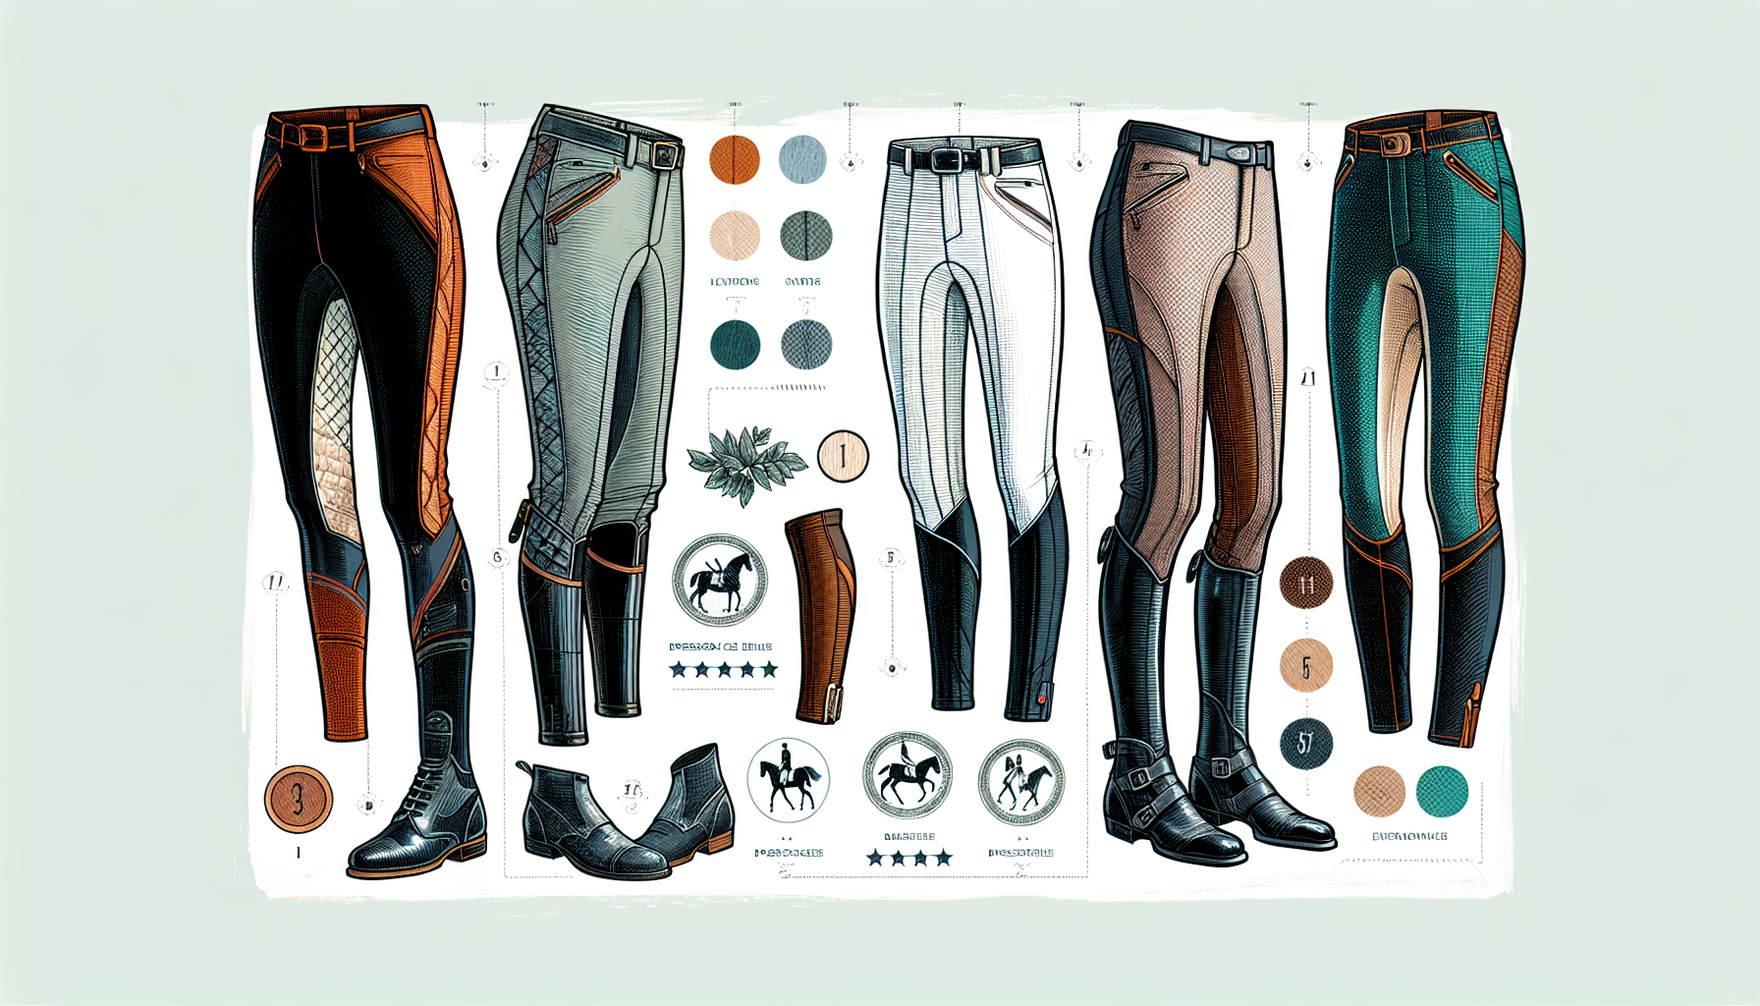 A detailed illustration showcasing multiple variations of women's high-performance dressage breeches. Focus on presenting a variety of styles and designs, highlighting the key features that cater to t